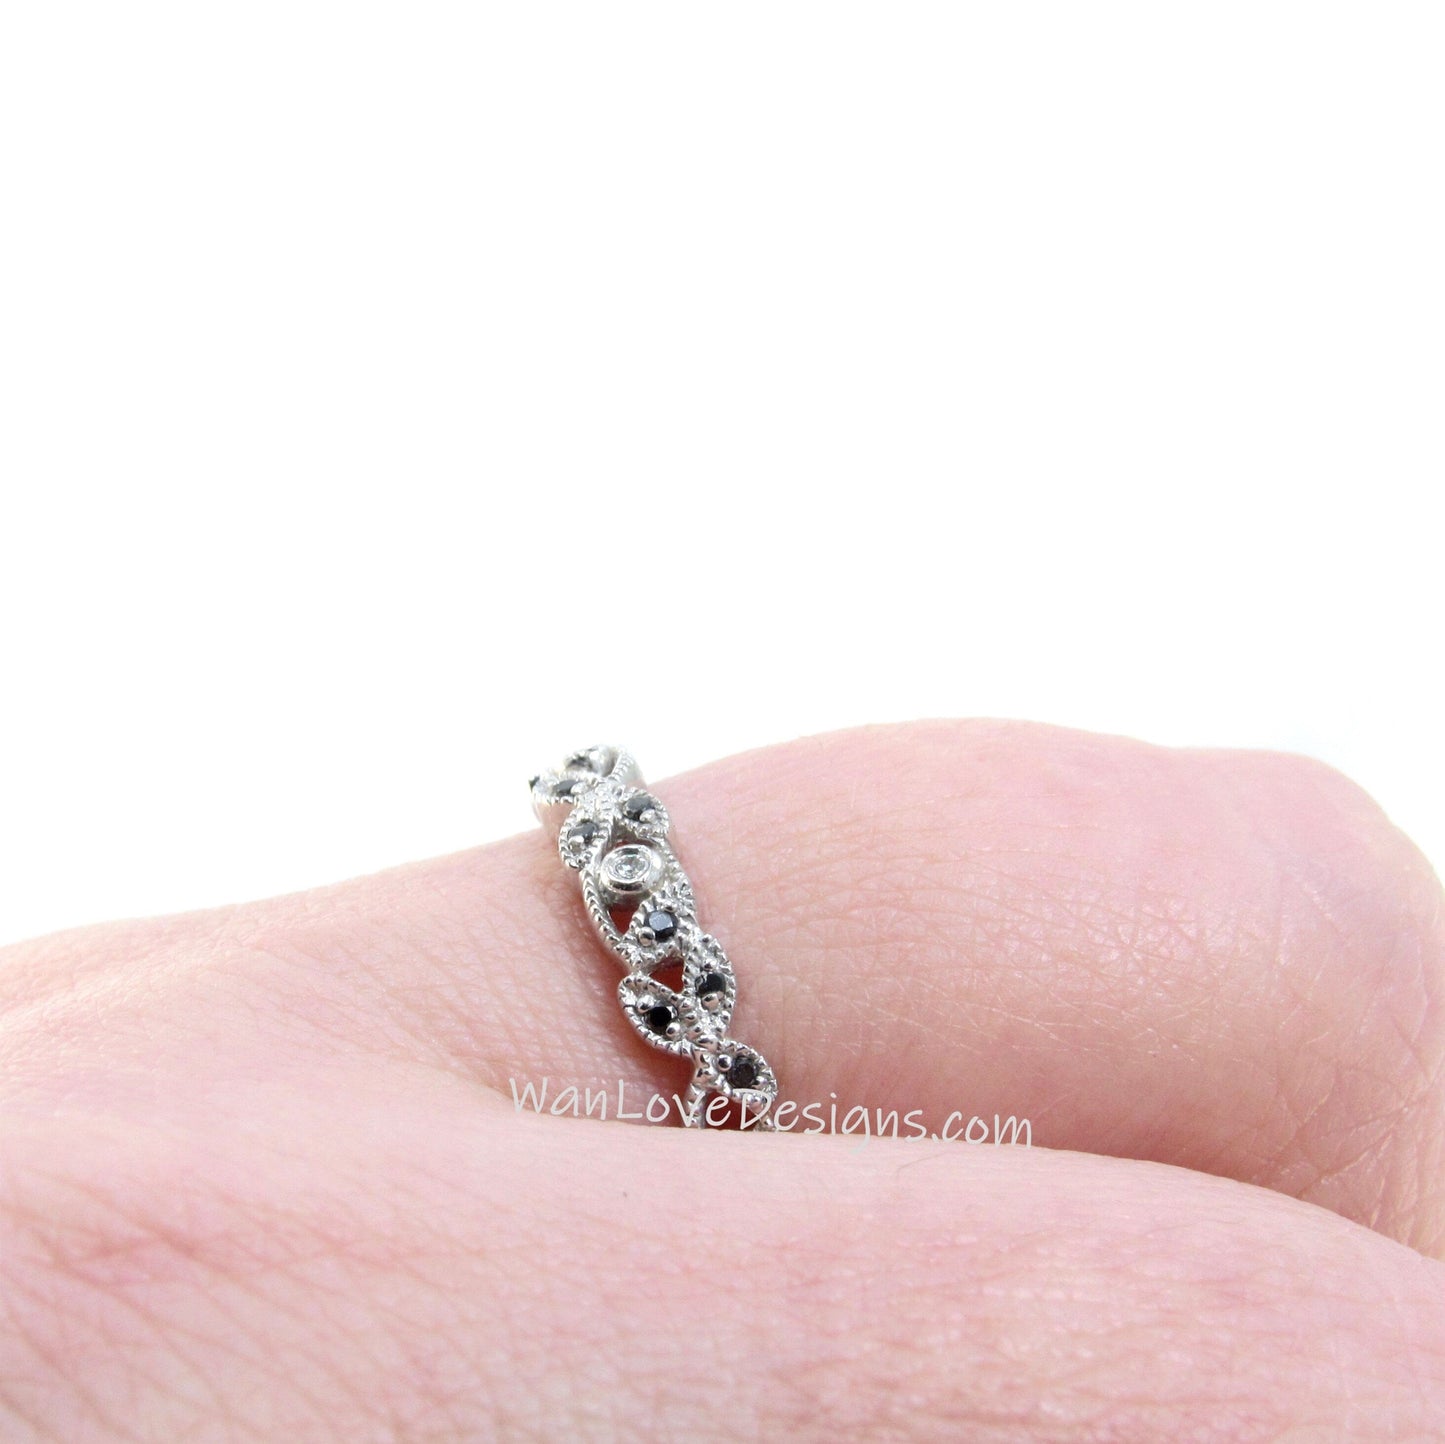 Black & White Diamond Milgrain leaf Eternity Stackable Wedding Band Ring Vintage leaves ring Engagement Anniversary Antique-Ready to ship Wan Love Designs